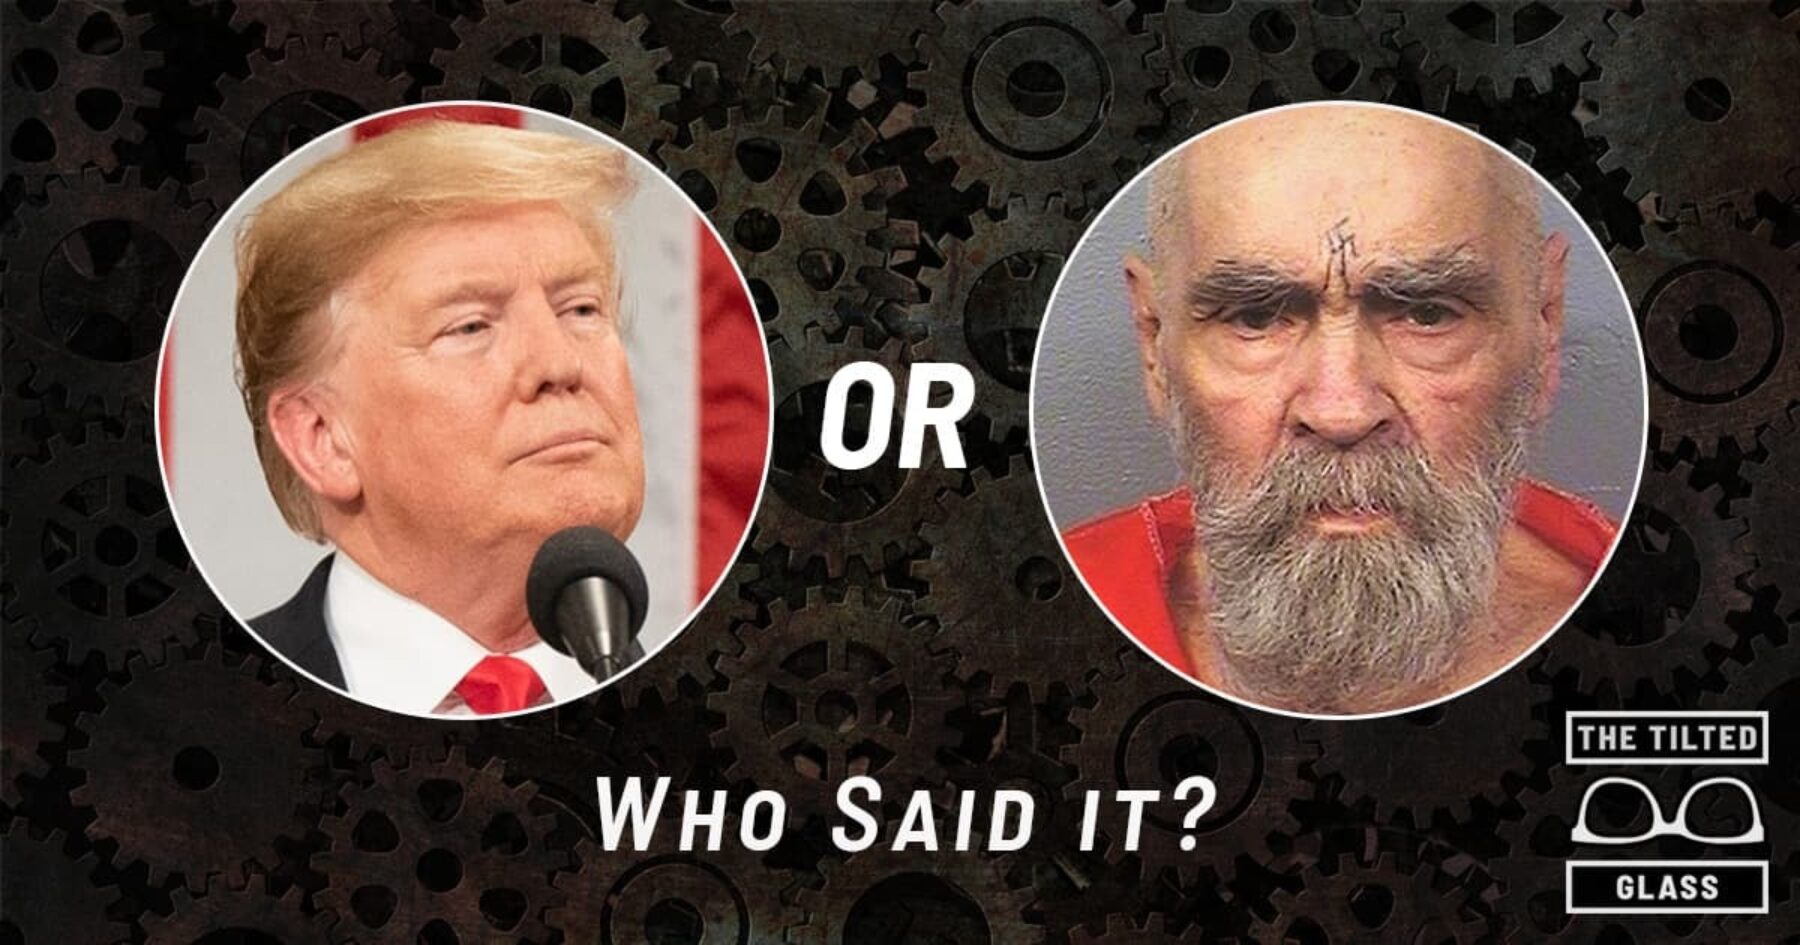 Quiz: Who Said It? Donald Trump or Charles Manson? Quotes from Cult Leaders